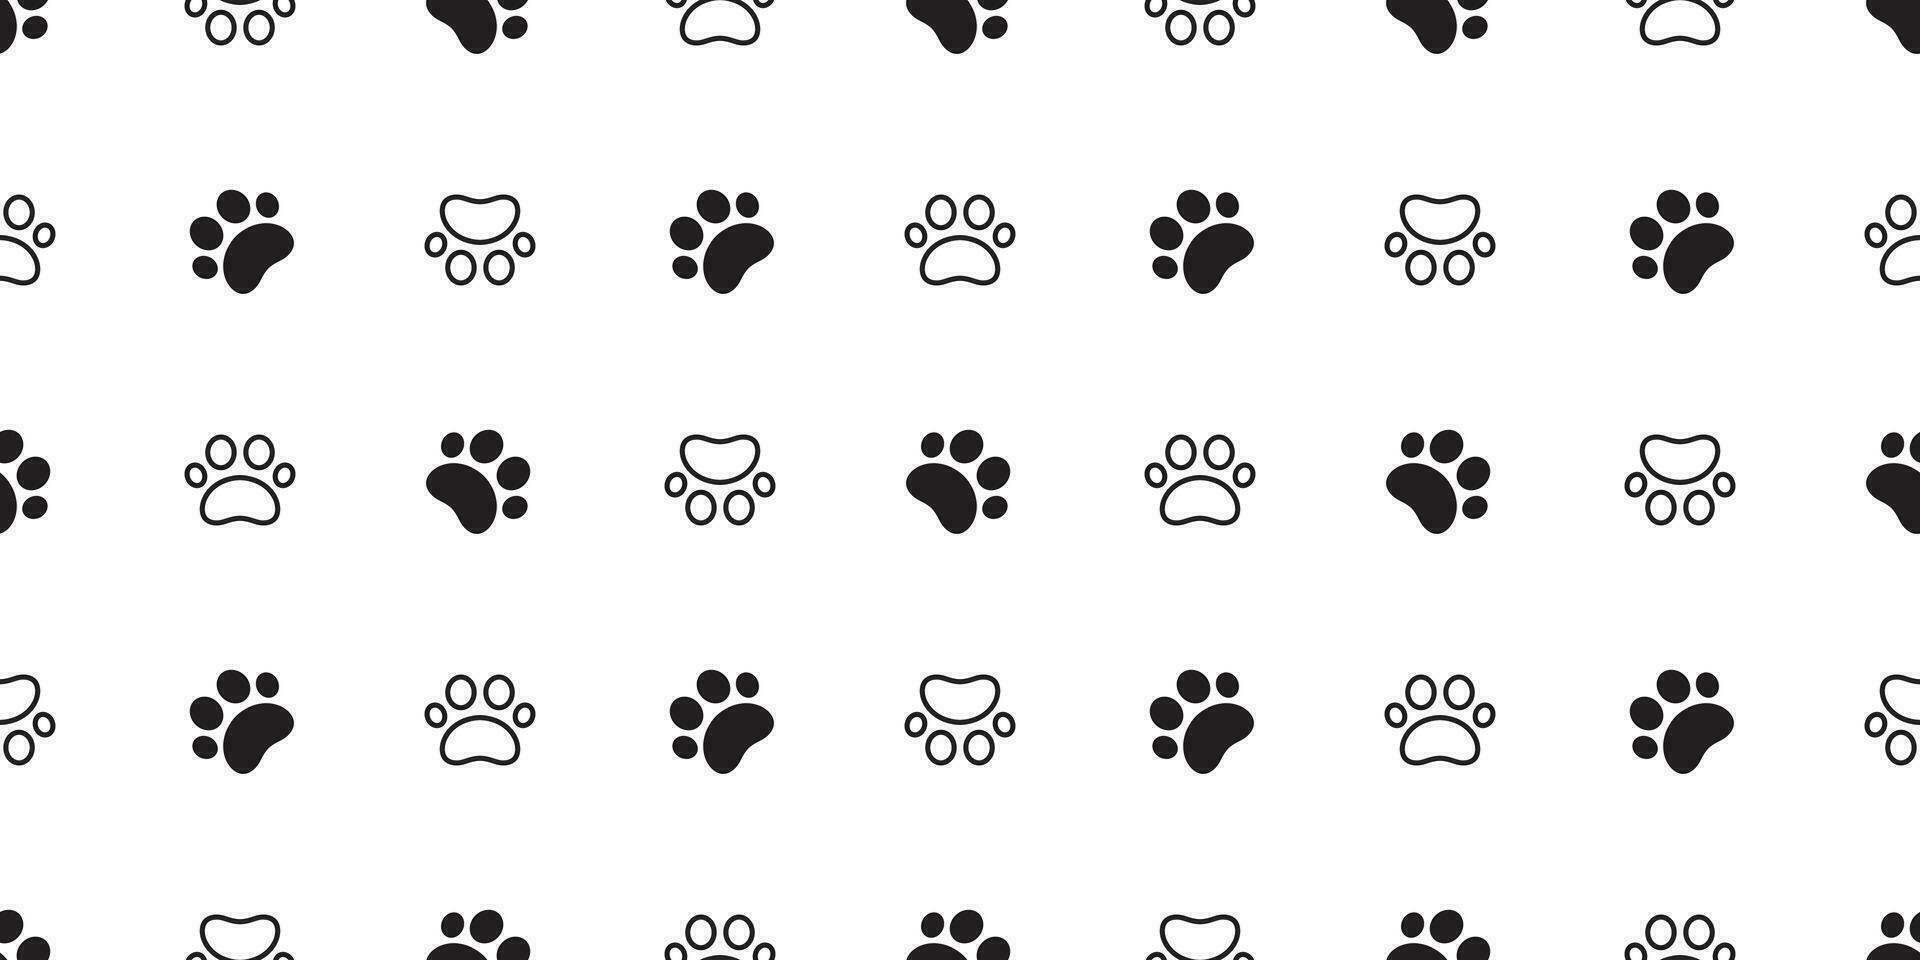 Dog Paw seamless vector footprint pattern kitten puppy tile background repeat wallpaper scarf isolated cartoon illustration doodle